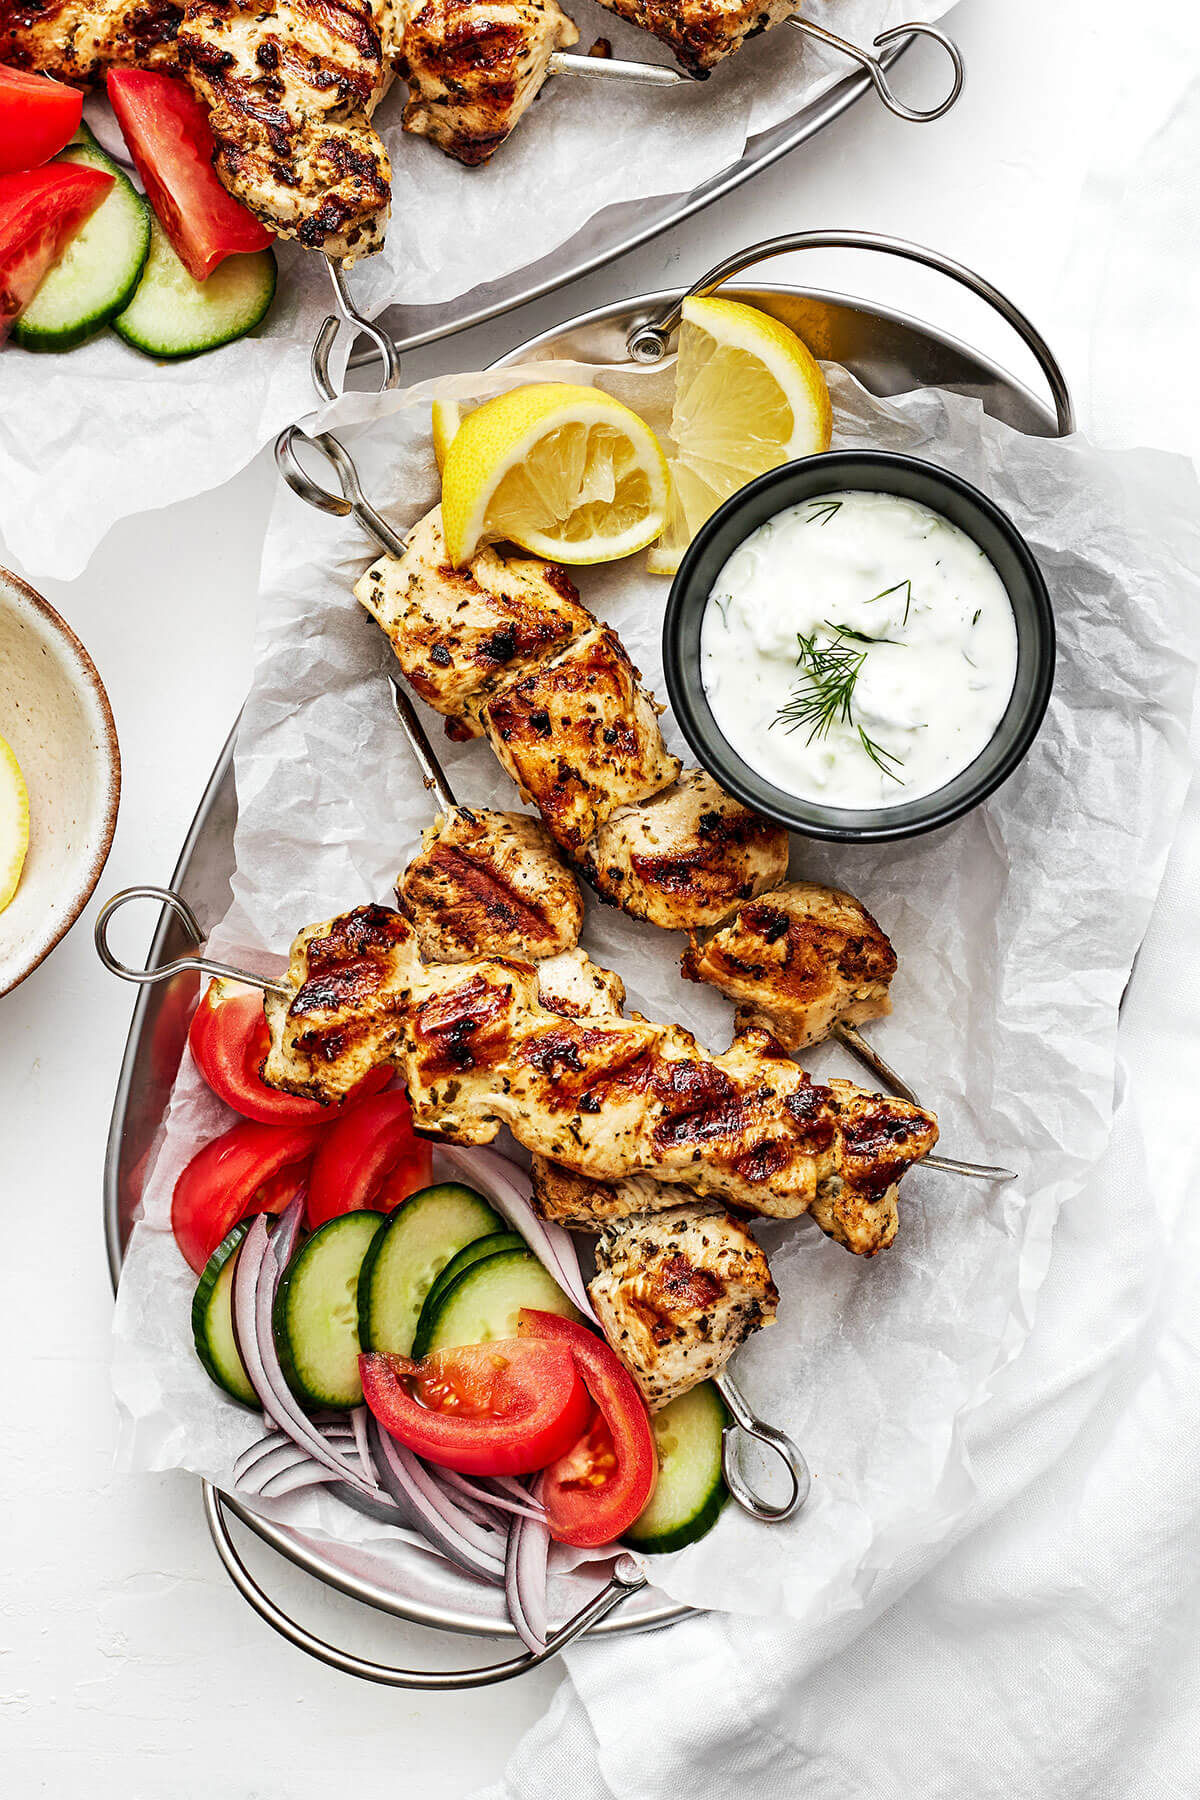 A plate of grilled chicken souvlaki